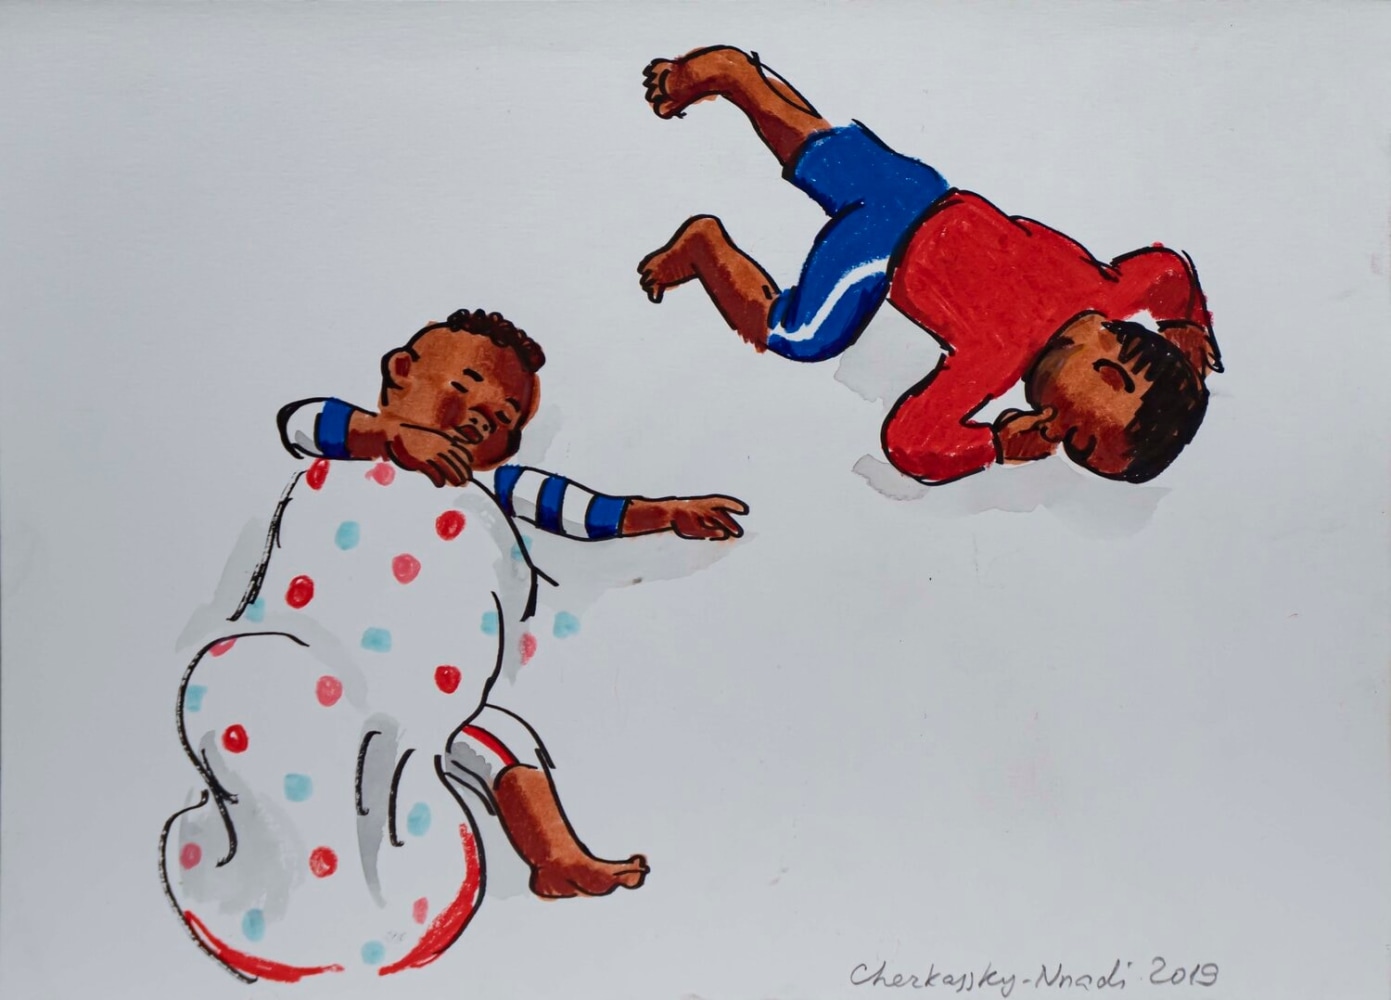 Zoya Cherkassky
Sleeping Children, 2019
Markers and wax crayons on paper
9 x 12.5&amp;nbsp;inches